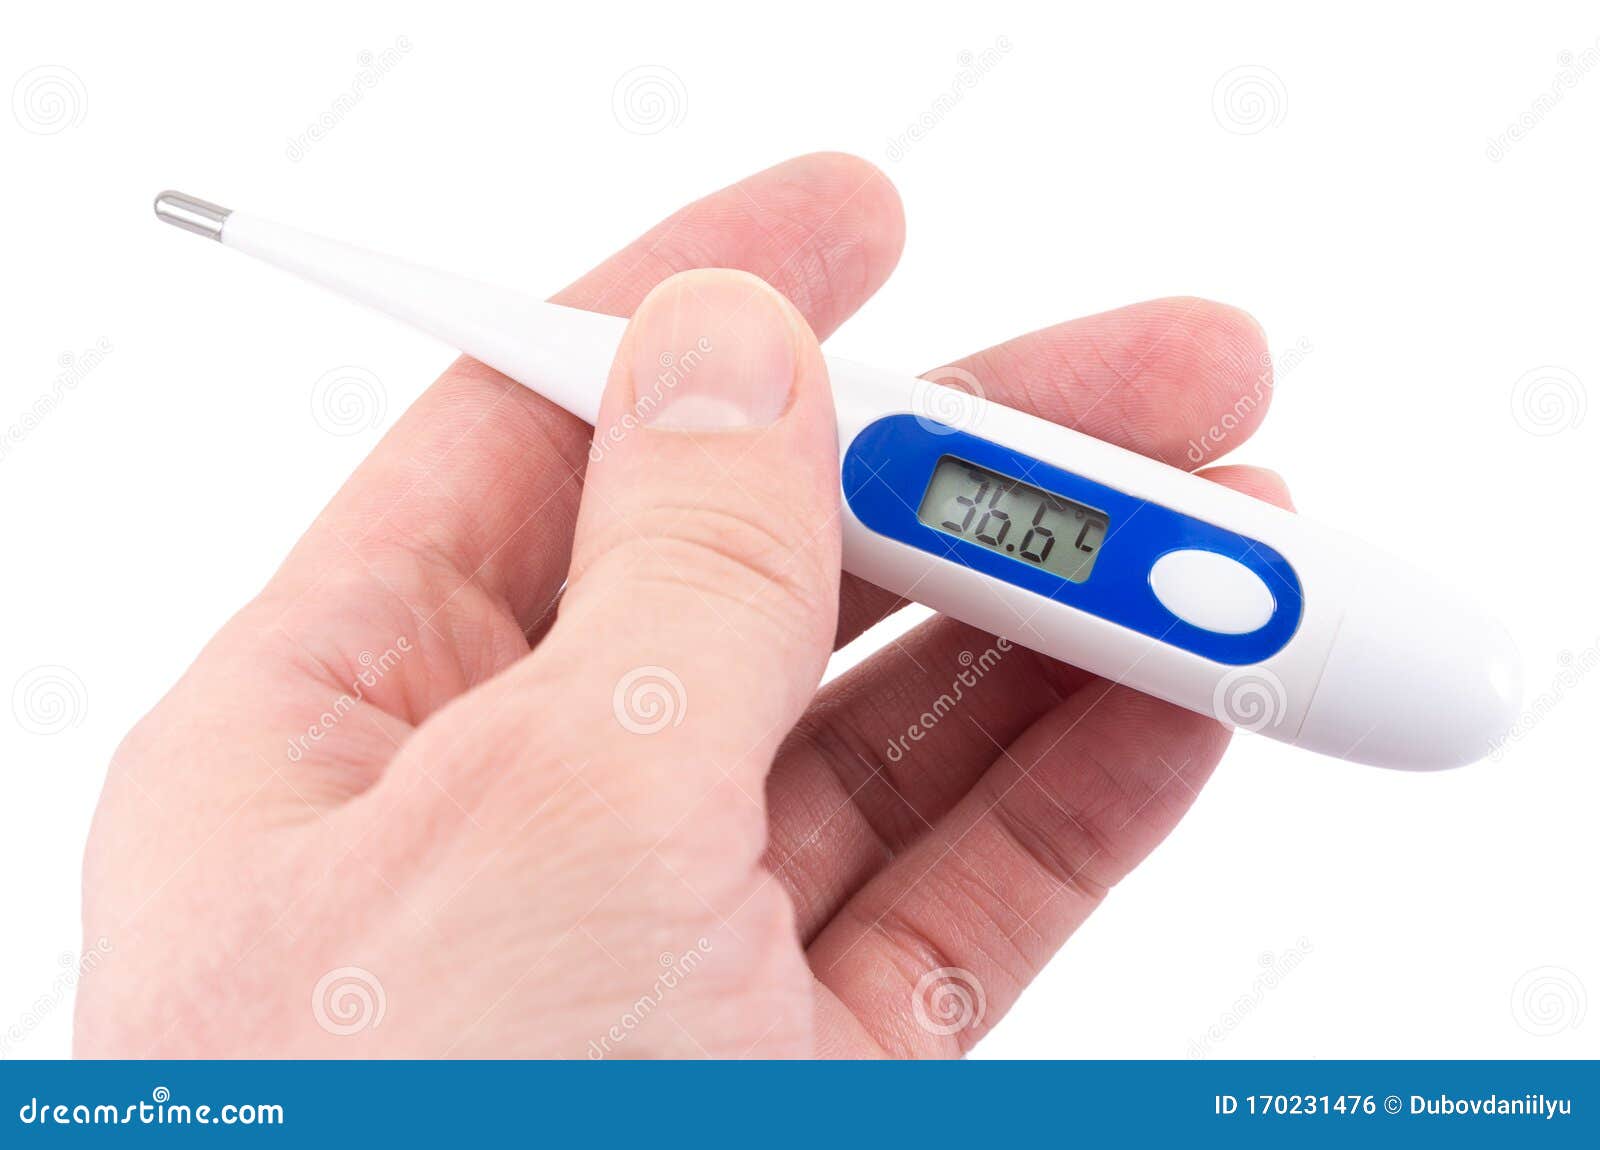 Electronic Thermometer In Human Hand Isolated On White Background